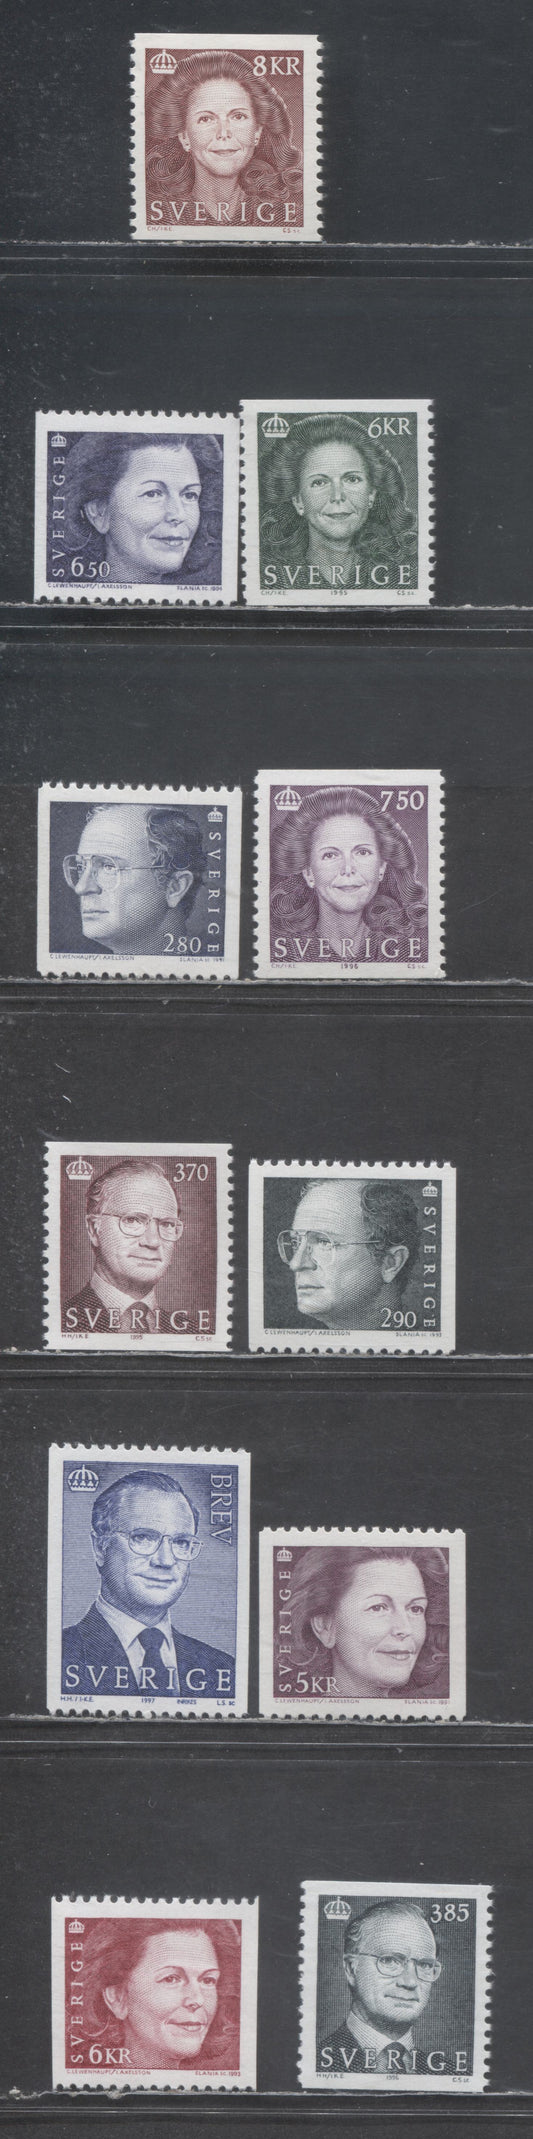 Lot 69 Sweden SC#1784/1796 1990-1997 Carl XVI Gustaf & Queen Silvia Definitives, 11 VFNH Singles, Click on Listing to See ALL Pictures, 2017 Scott Cat. $24.45